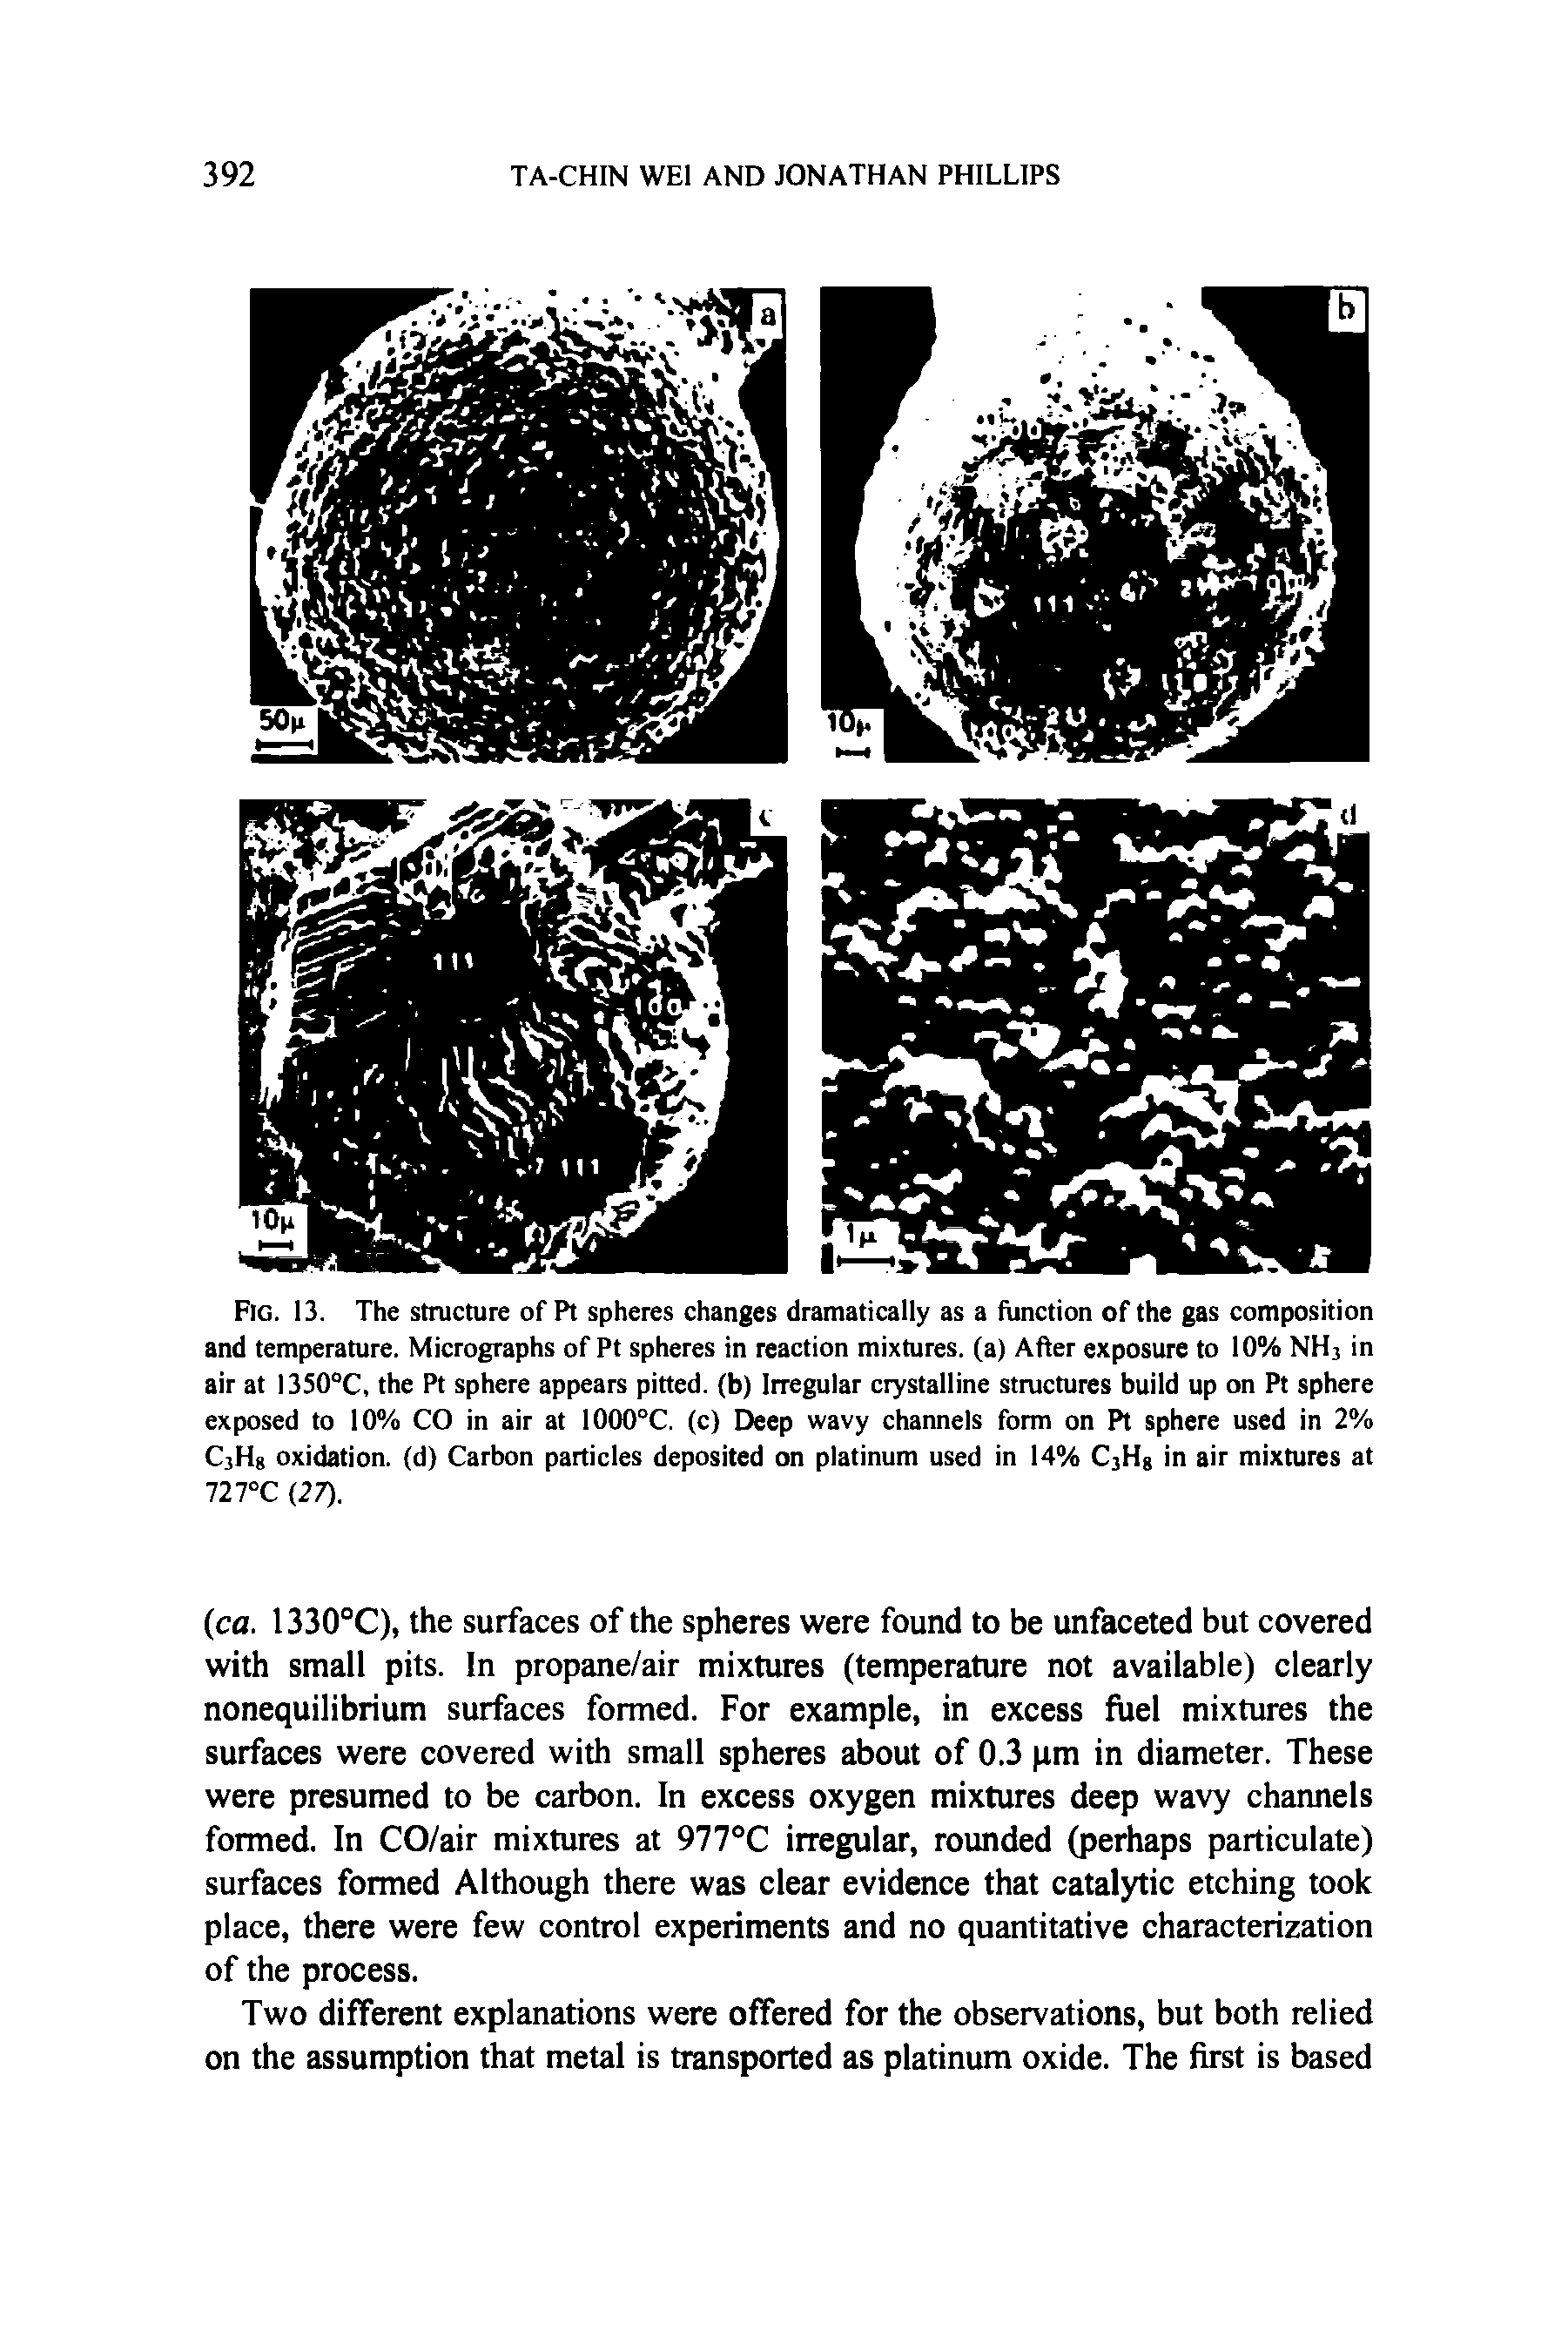 Fig. 13. The structure of Pt spheres changes dramatically as a function of the gas composition and temperature. Micrographs of Pt spheres in reaction mixtures, (a) After exposure to 10% NH3 in air at I350°C, the Pt sphere appears pitted, (b) Irregular crystalline structures build up on Pt sphere exposed to 10% CO in air at 1000°C. (c) Deep wavy channels form on Pt sphere used in 2% C,H8 oxidation, (d) Carbon particles deposited on platinum used in 14% C3Hg in air mixtures at 727°C (27).